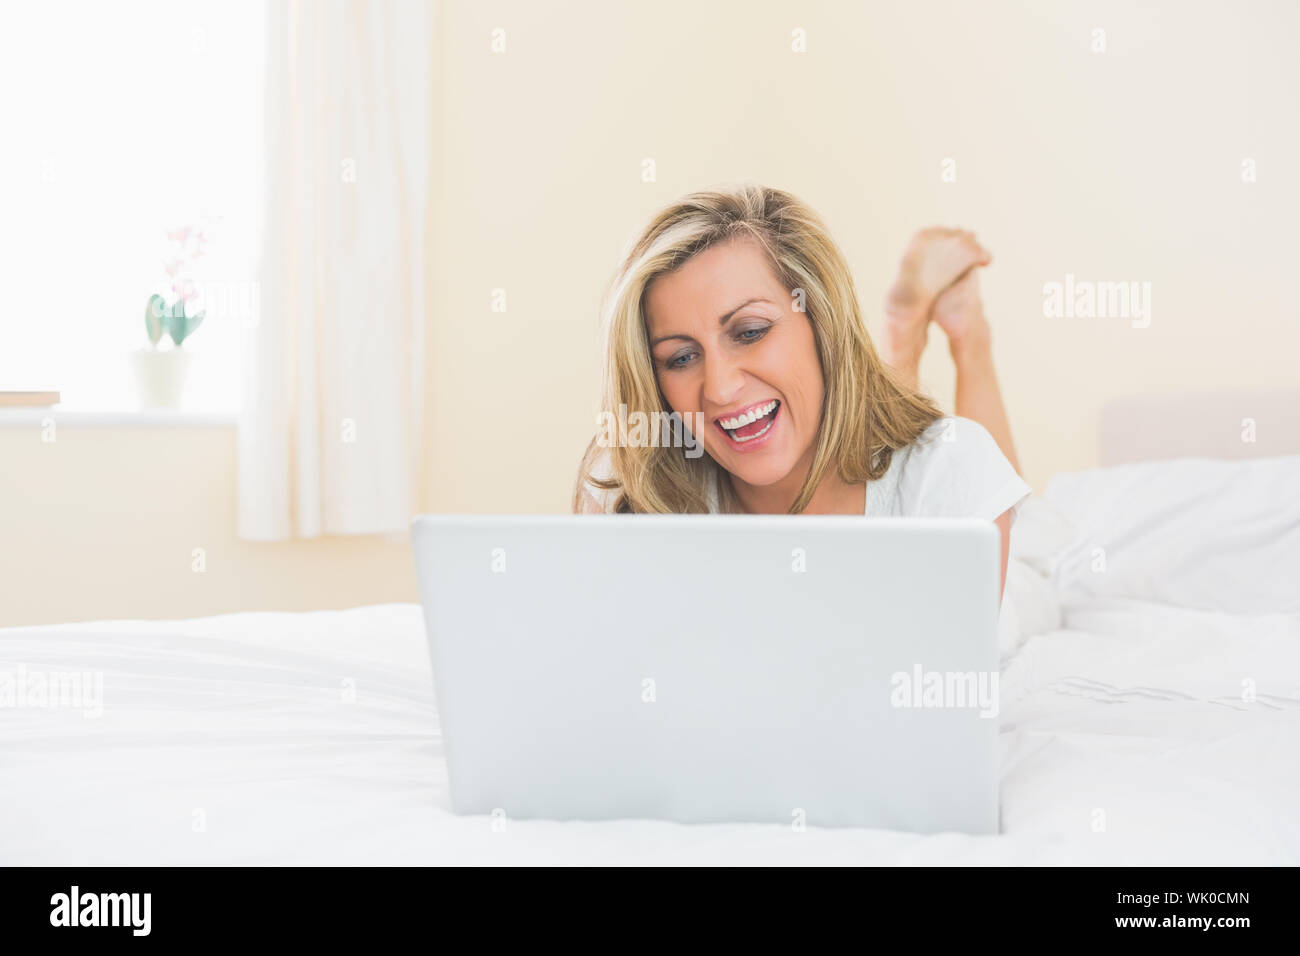 Laughing woman using a laptop lying on her bed Stock Photo